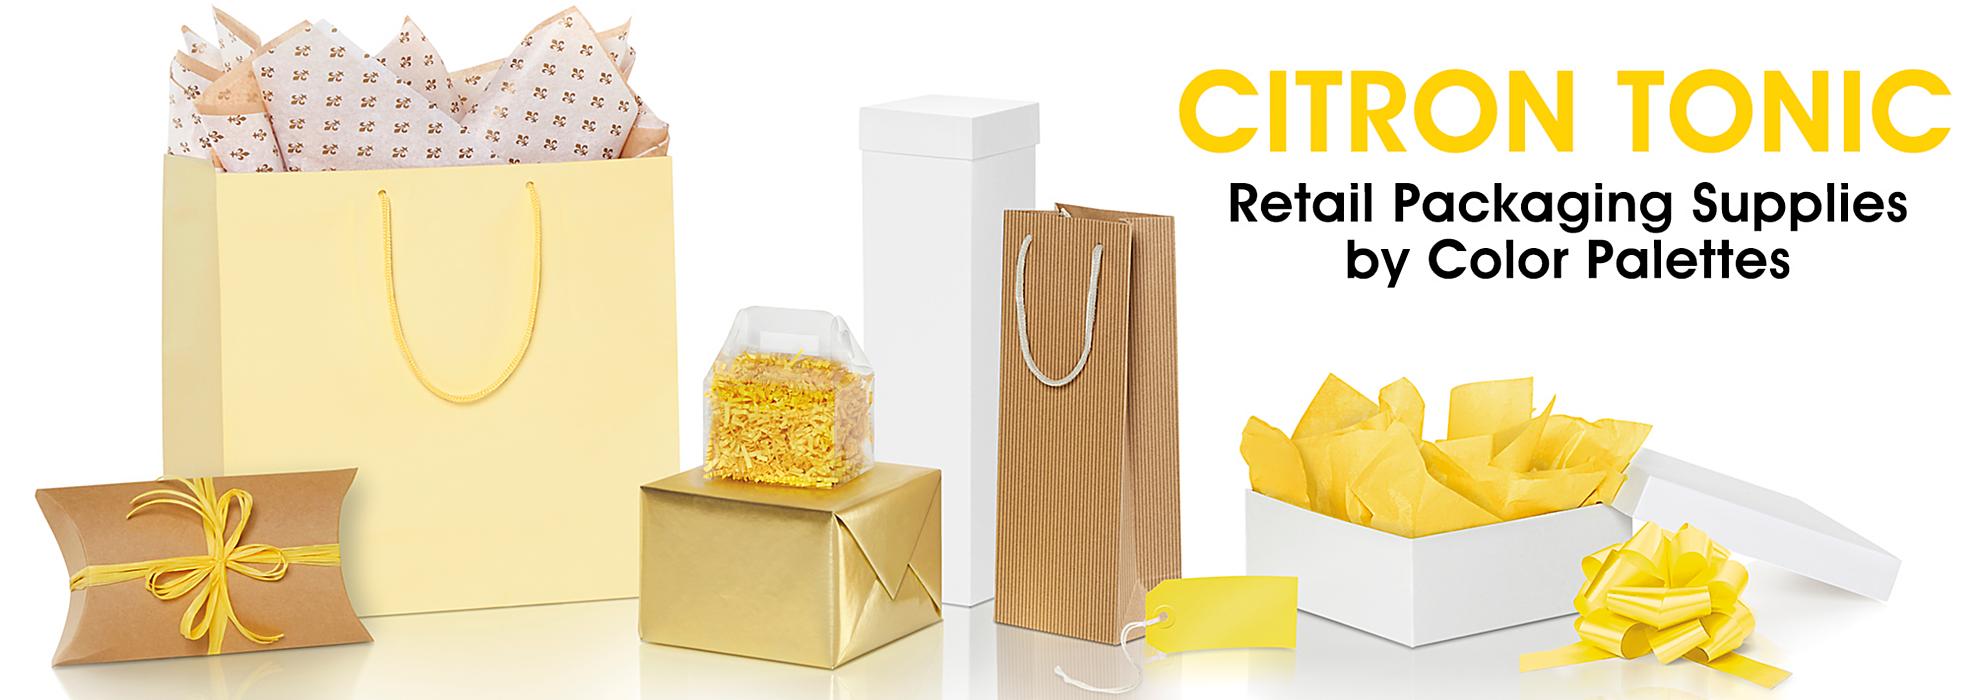 Citron Tonic - Retail Packaging Supplies by Color Palettes